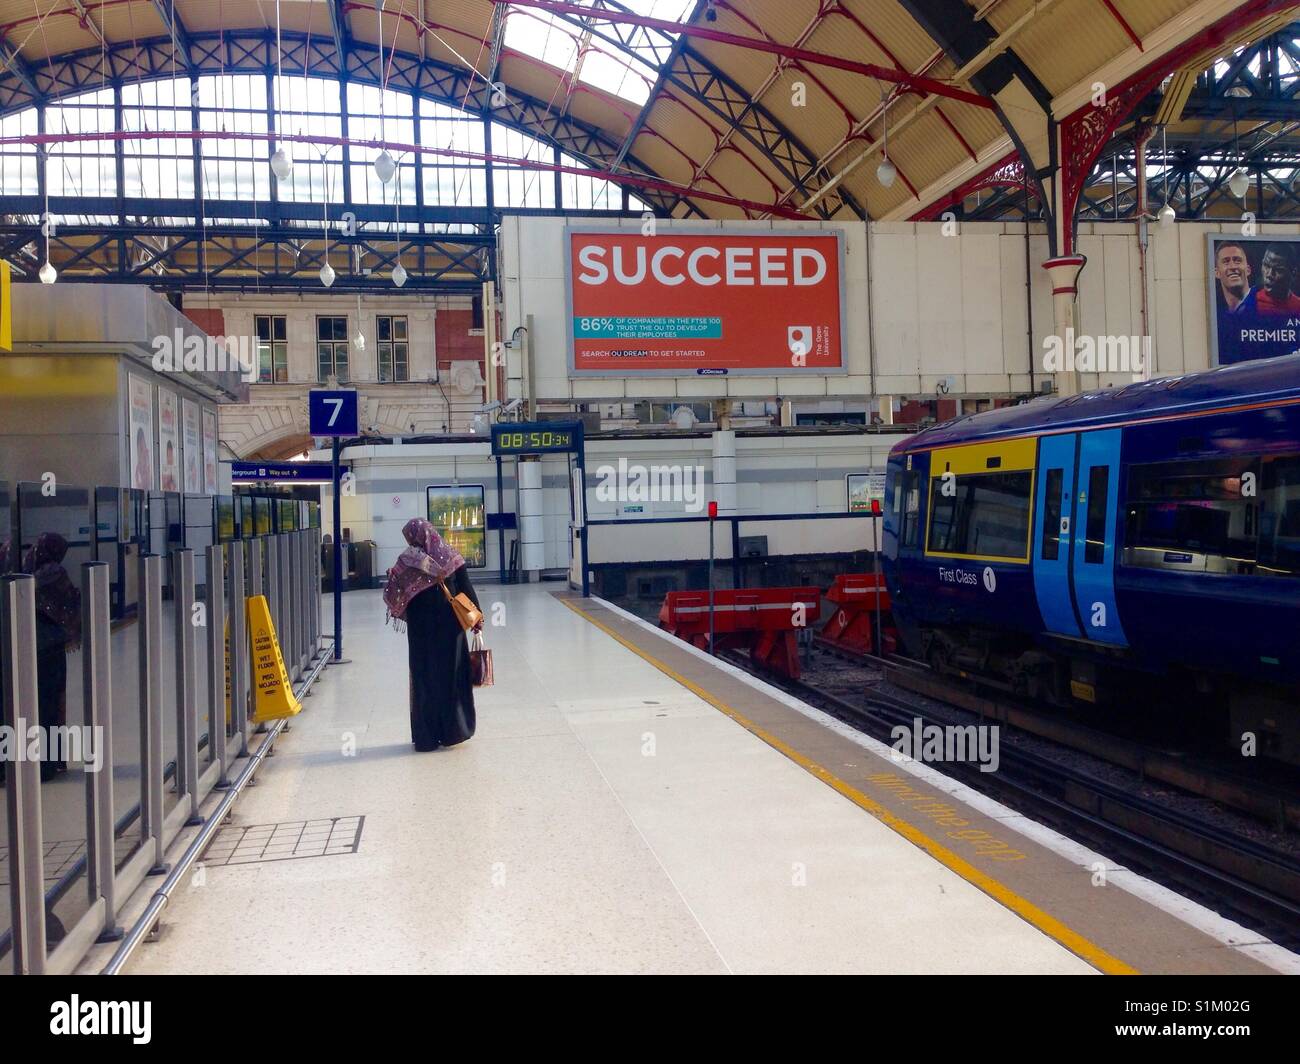 Succeed add in Station Stock Photo